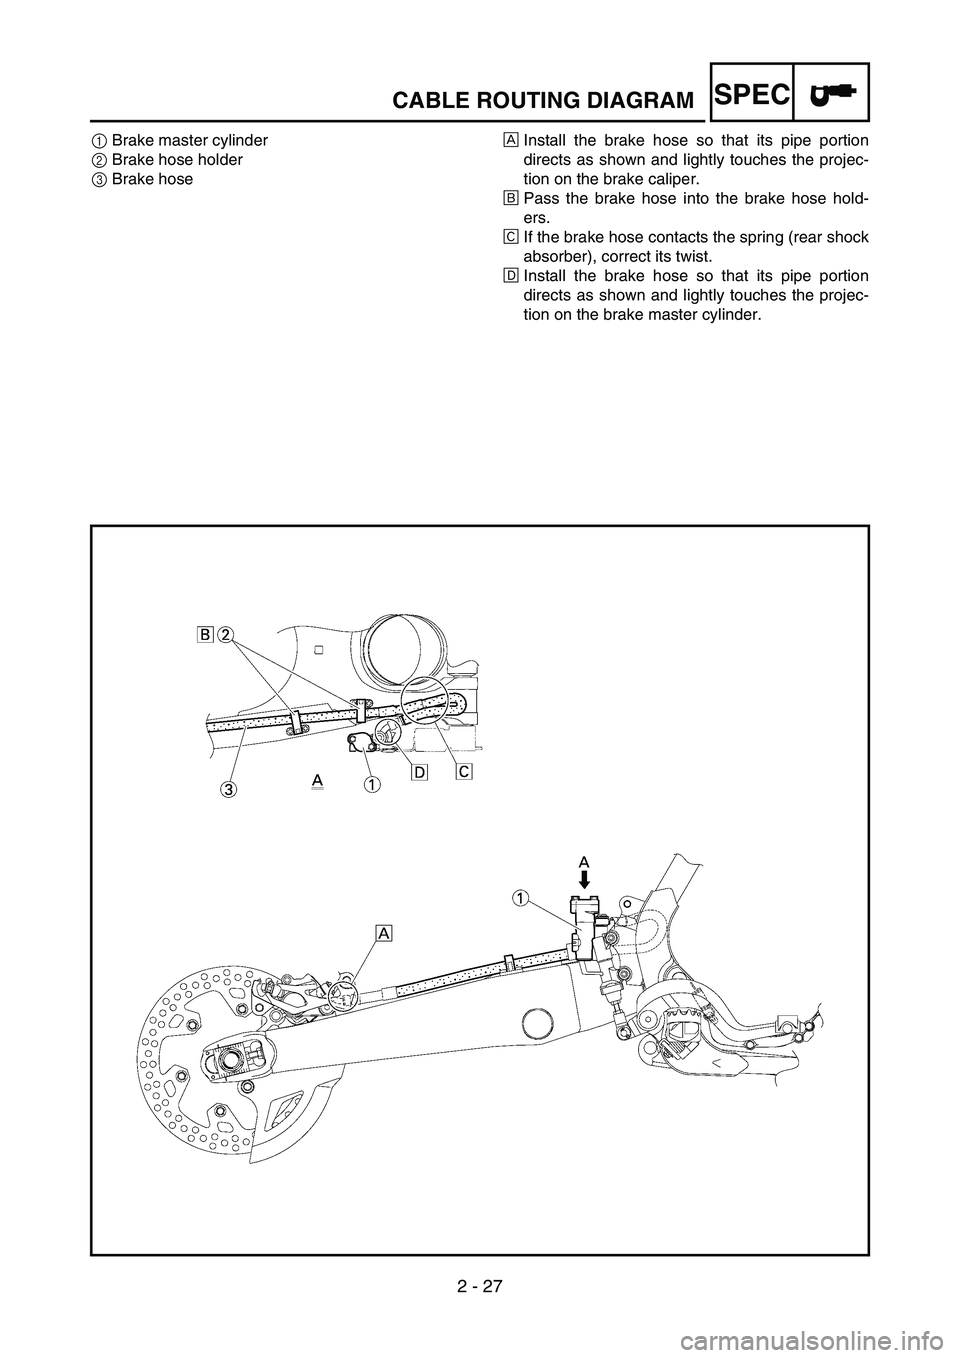 YAMAHA WR 450F 2007  Manuale de Empleo (in Spanish) 2 - 27
SPECCABLE ROUTING DIAGRAM
1Brake master cylinder
2Brake hose holder
3Brake hoseÈInstall the brake hose so that its pipe portion
directs as shown and lightly touches the projec-
tion on the bra